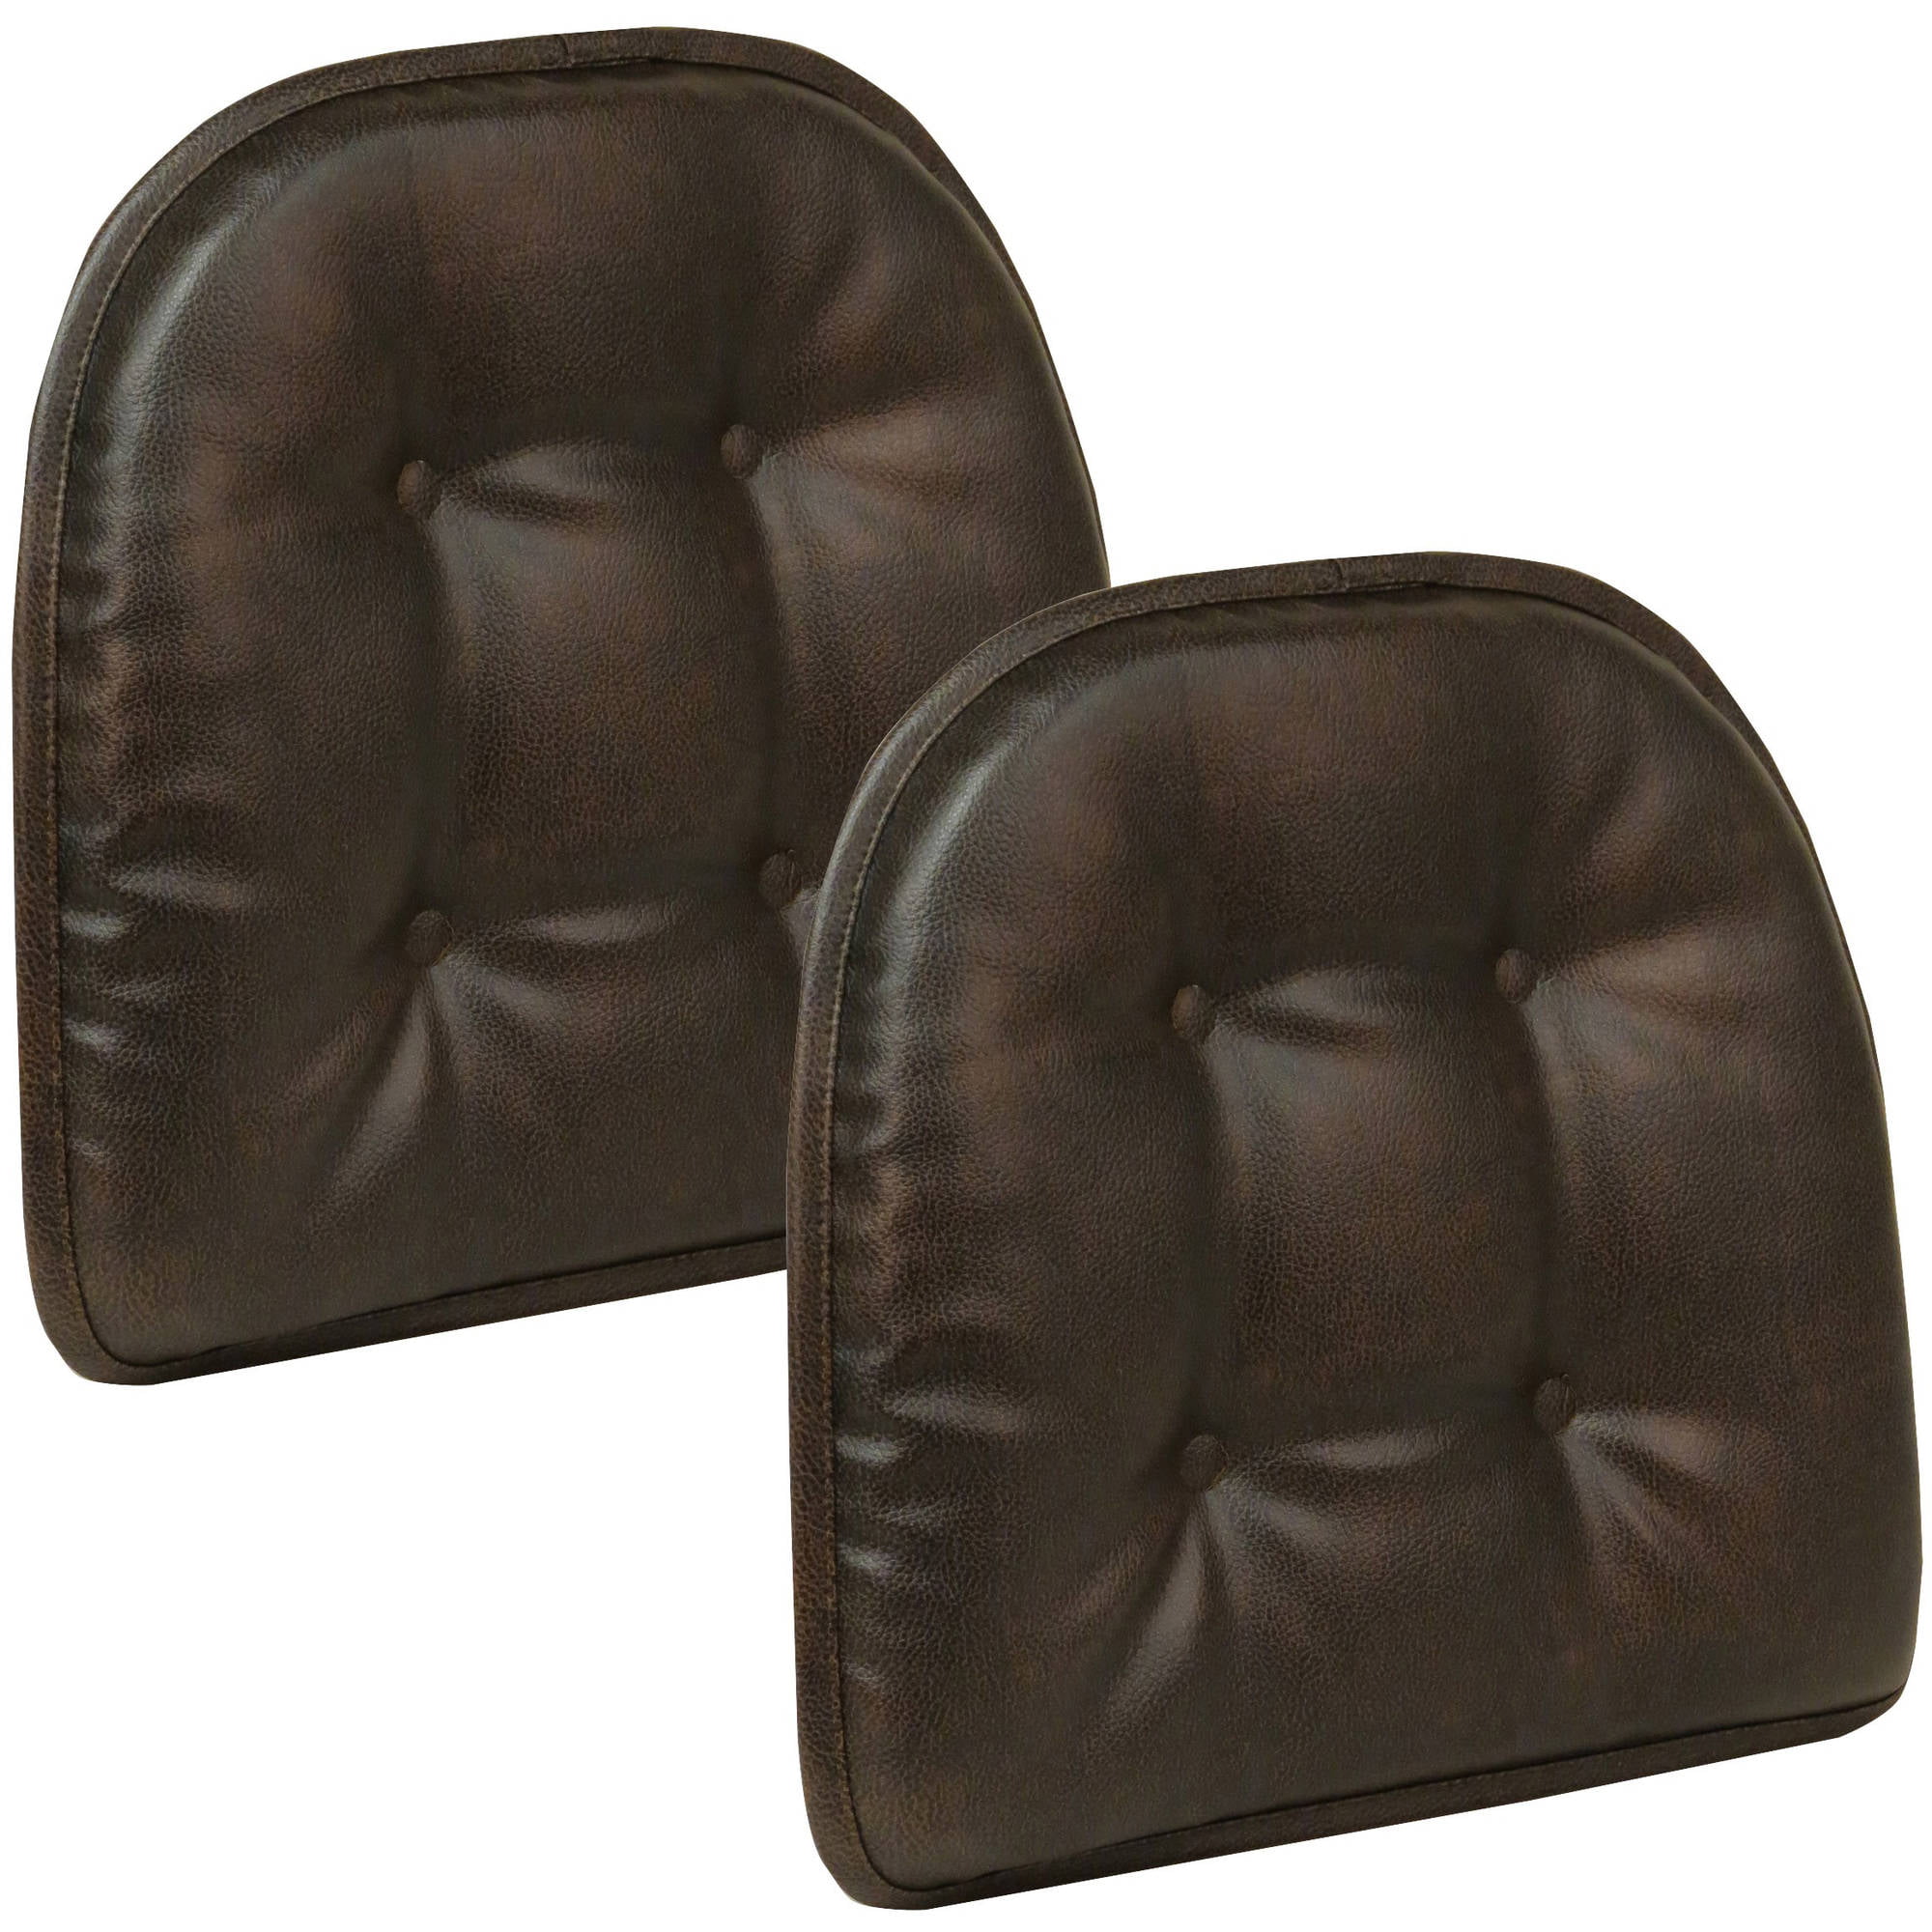 Faux Leather Tufted Chair Cushions Set, Leather Chair Cushion Replacement